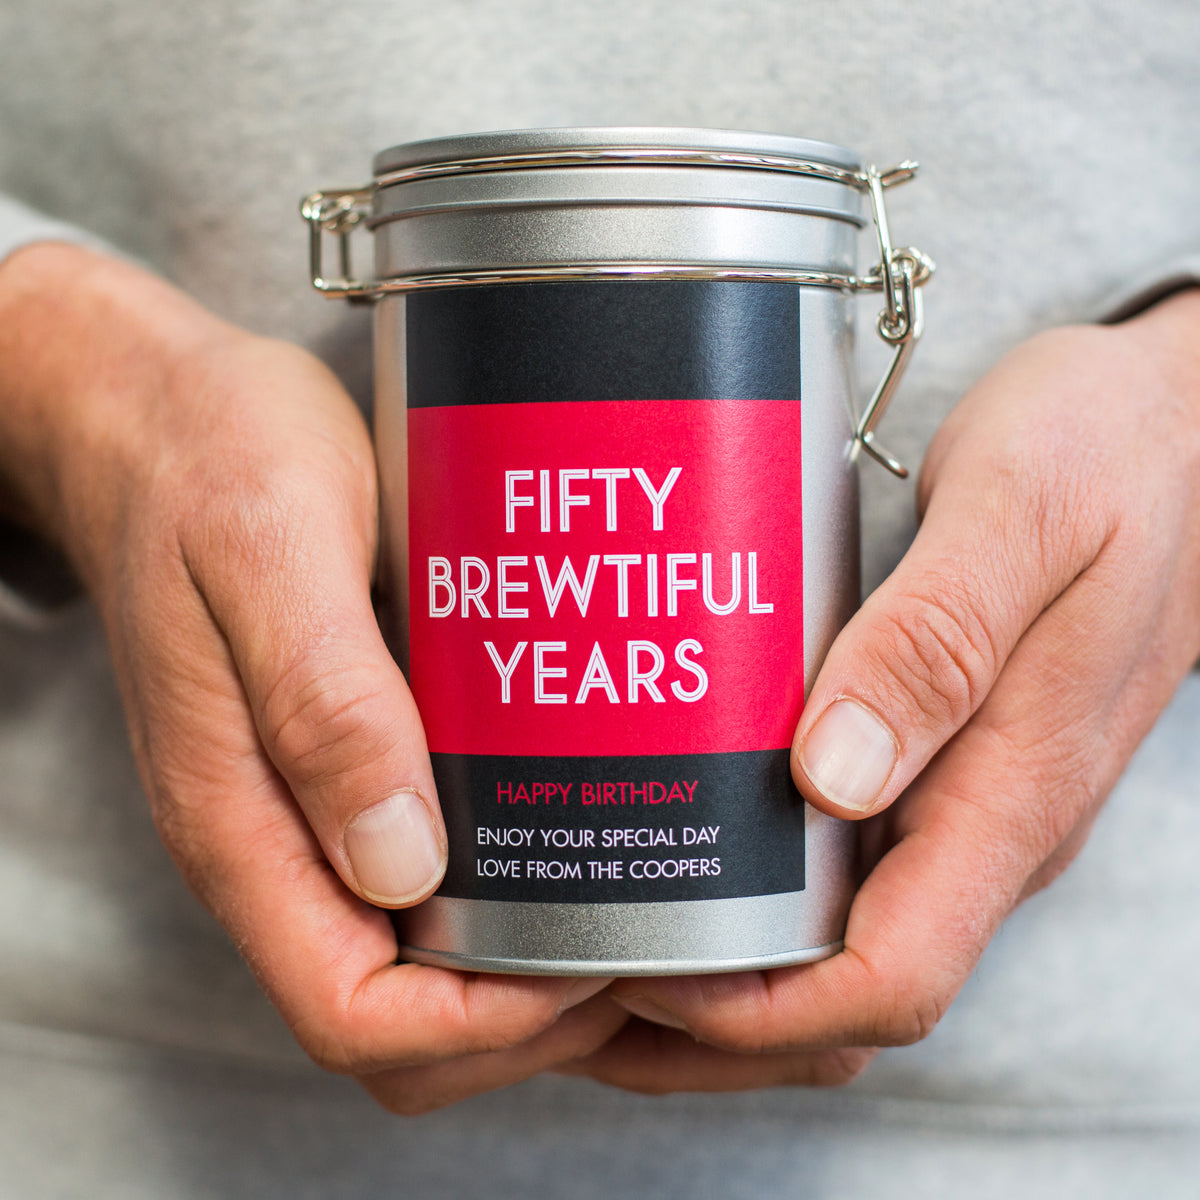 Fully Personalisable Coffee Gift In Tin